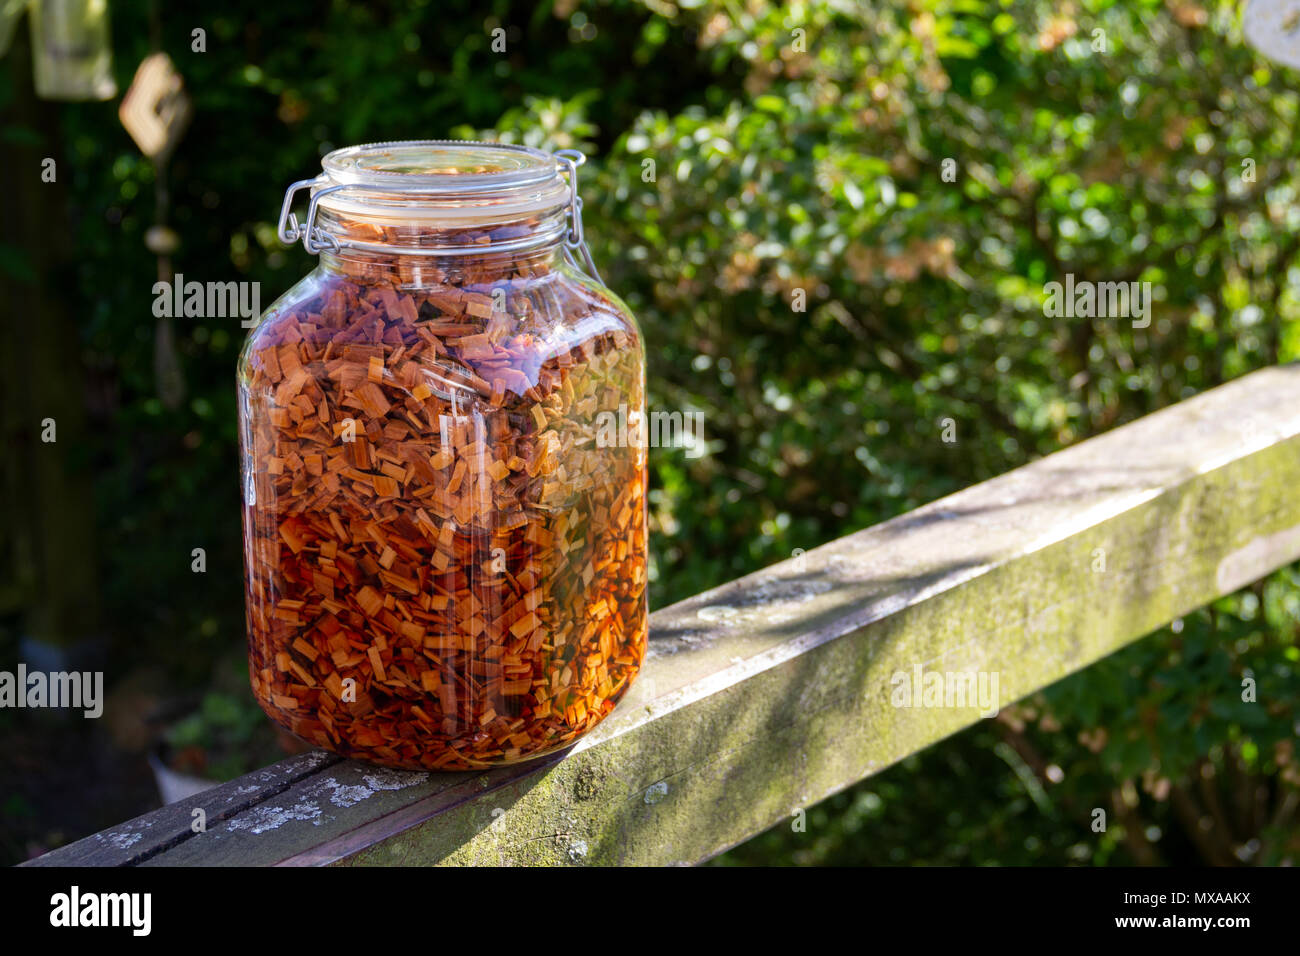 Wood chips is a bottle. Wooden Chips for bbq smoke flavor. Stock Photo